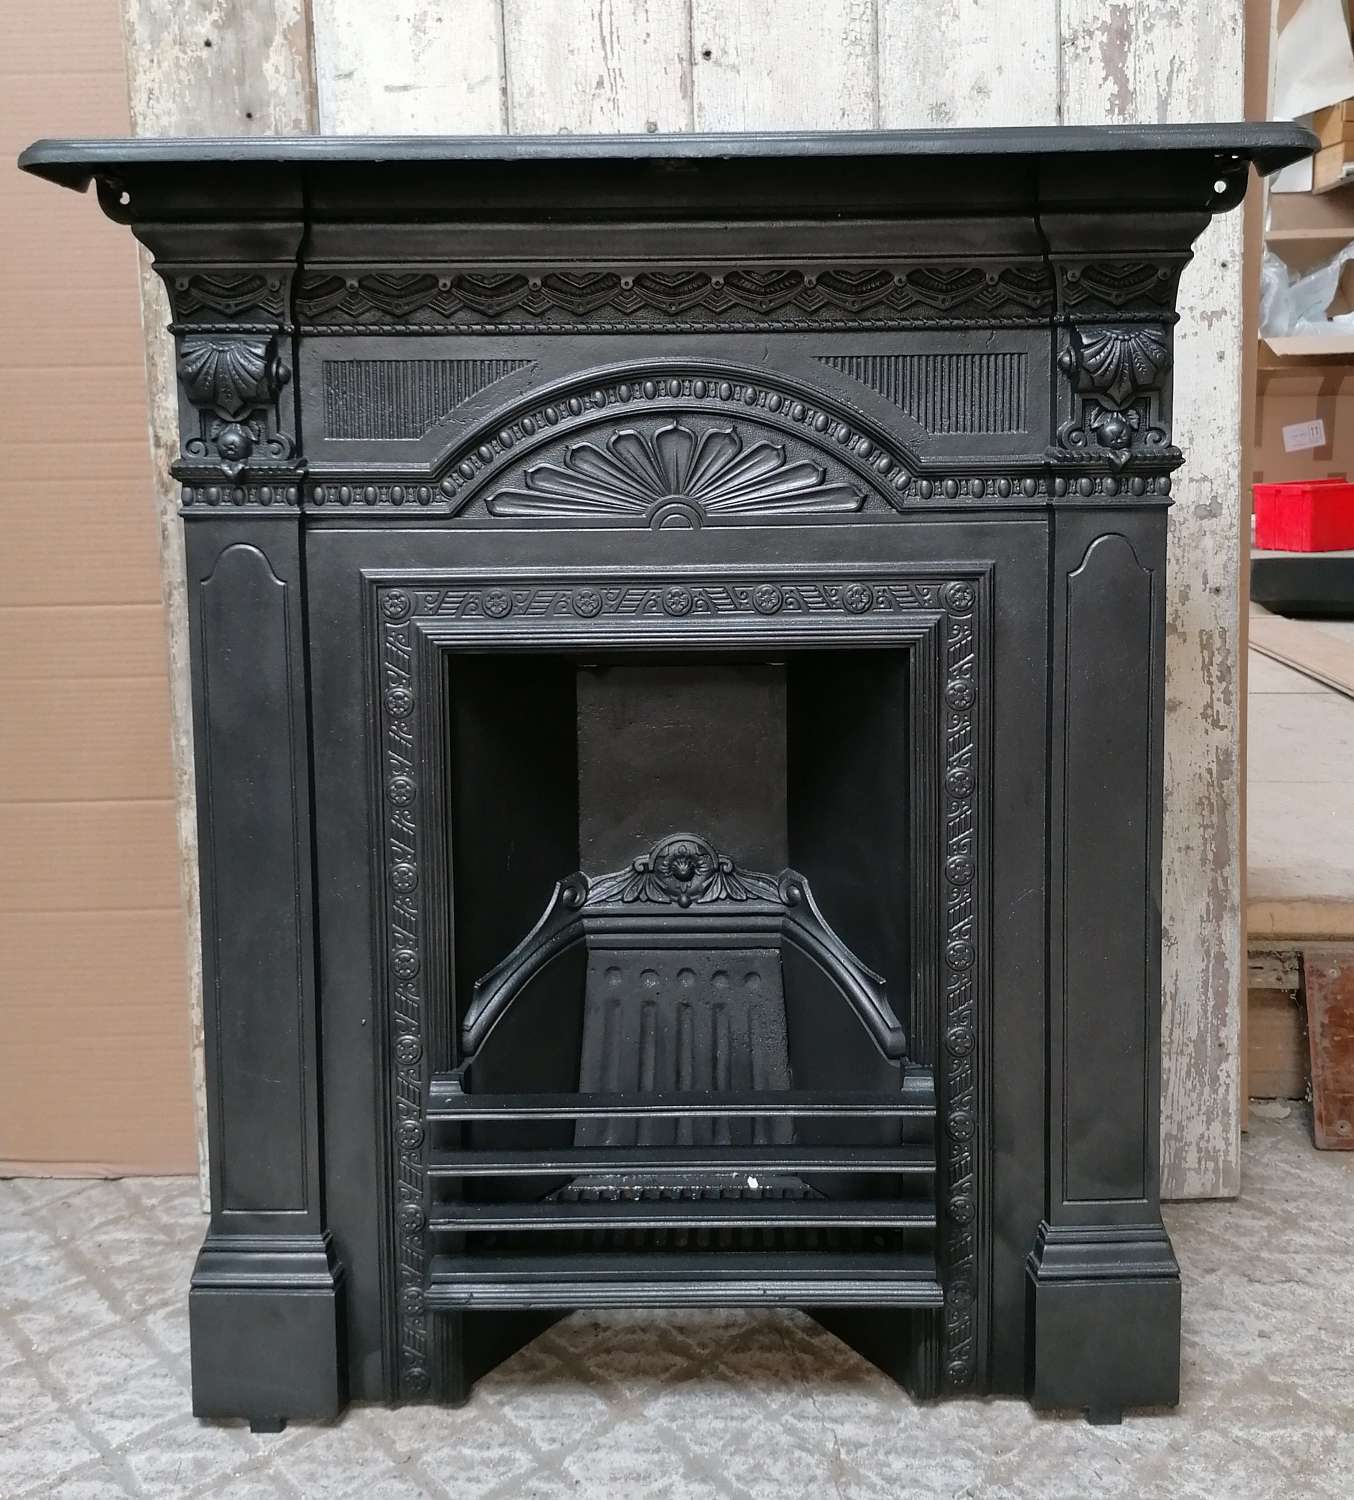 FC0092 AN ORNATE RECLAIMED VICTORIAN CAST IRON COMBINATION FIRE